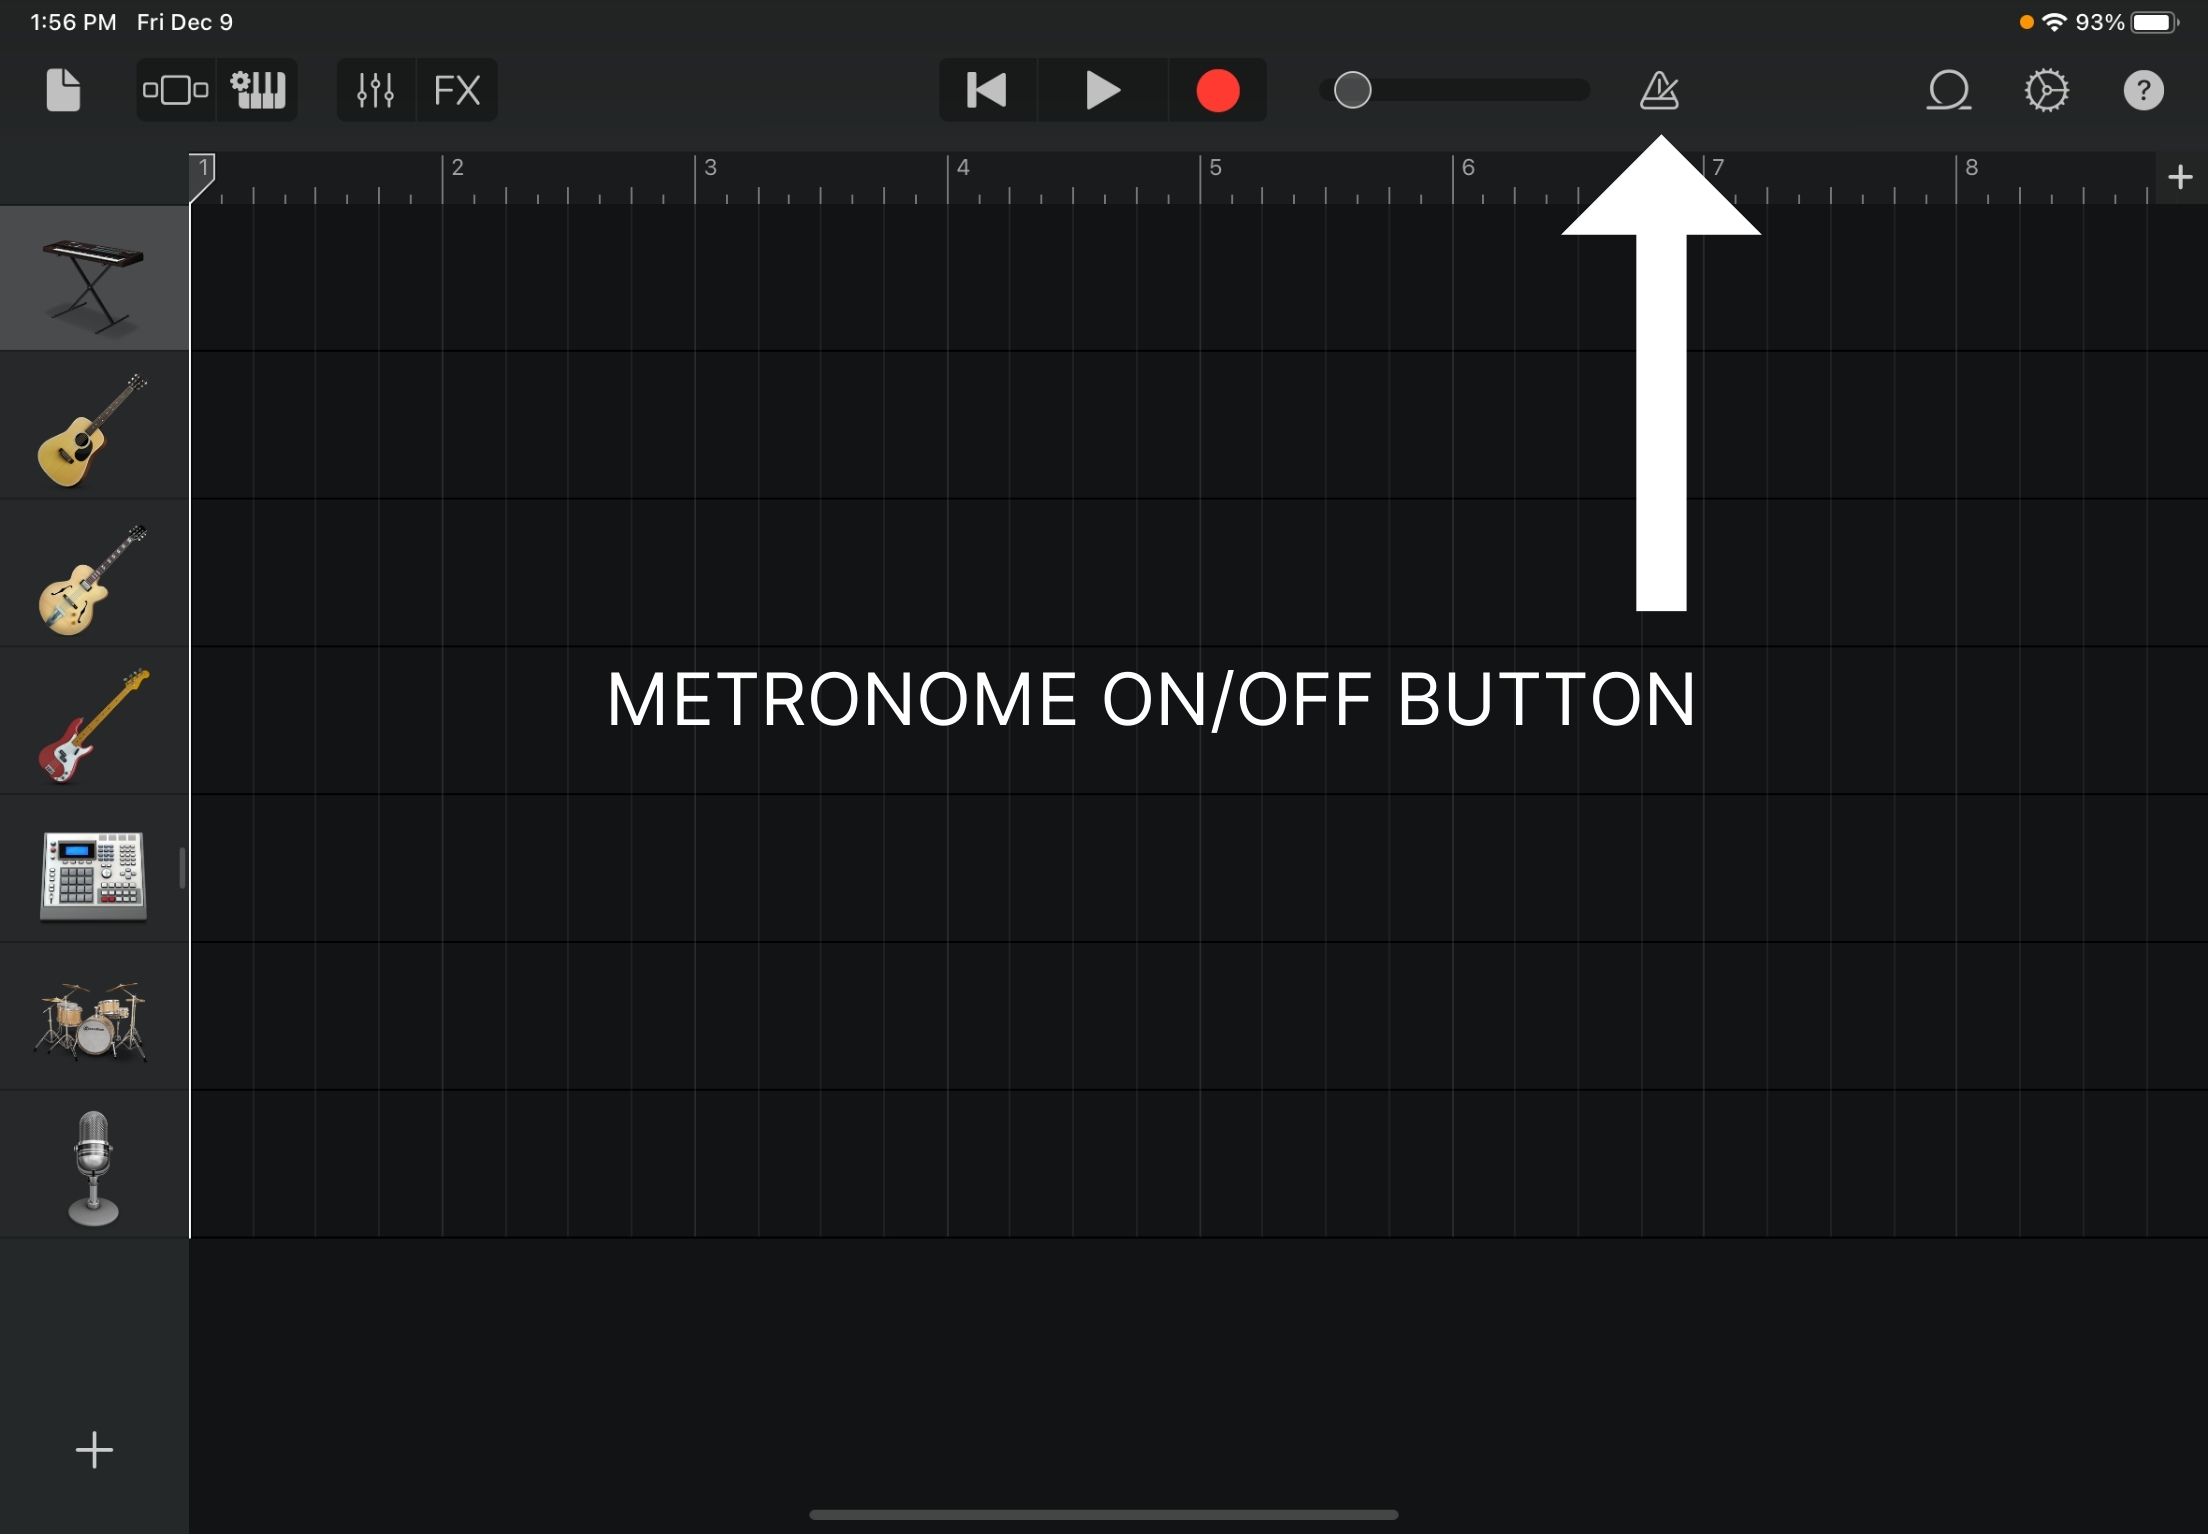 Metronome On/Off Button